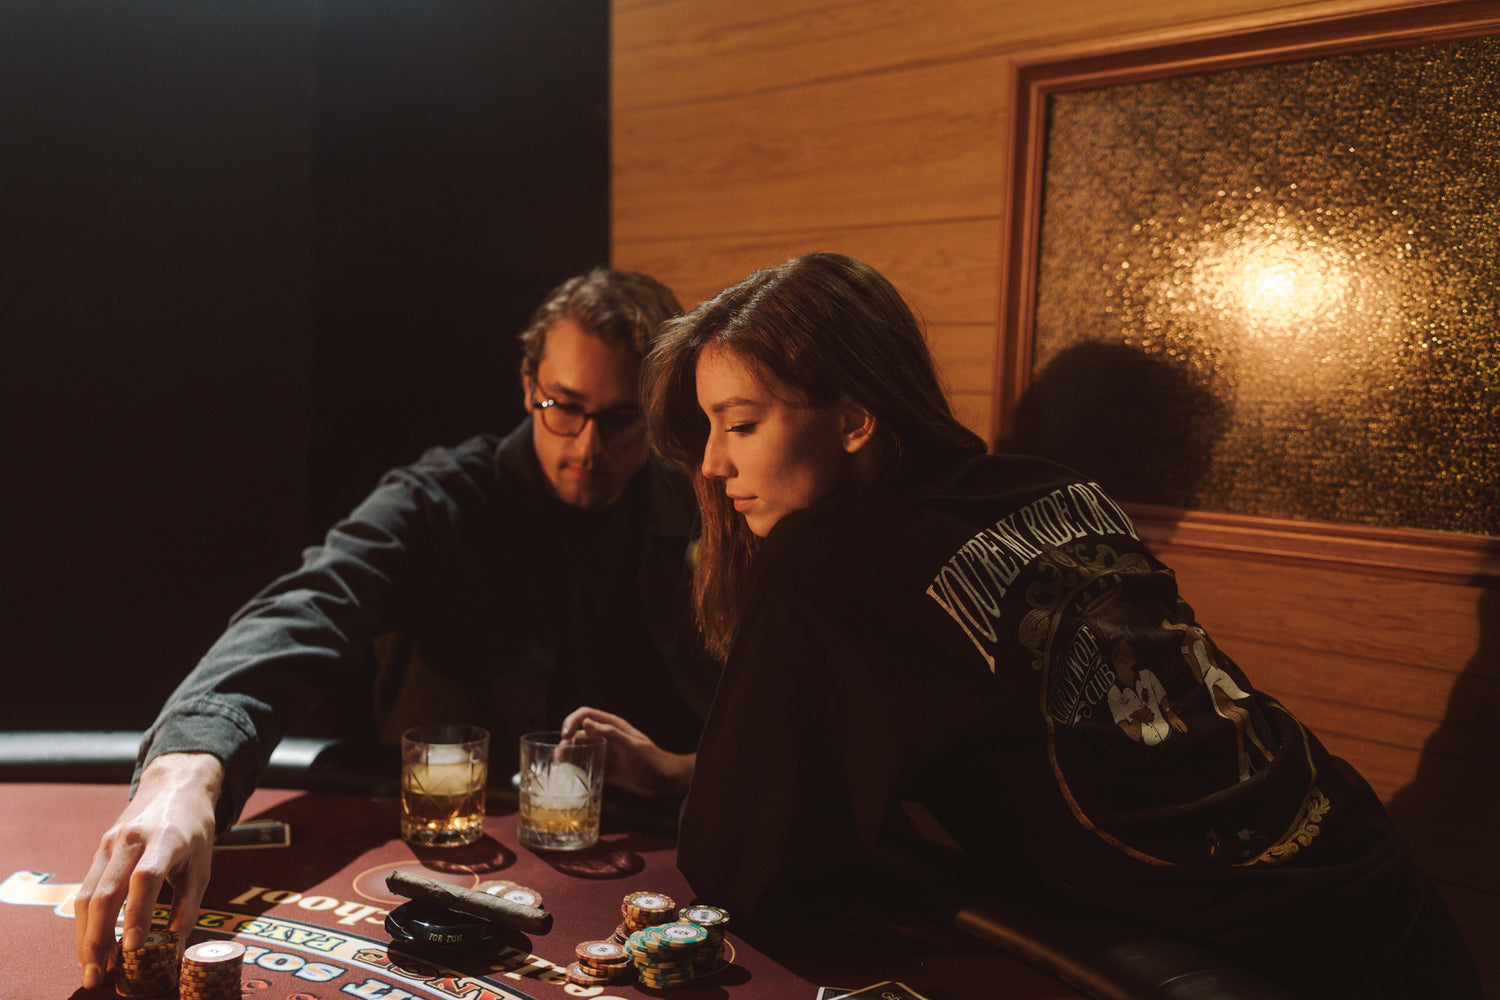 Man and woman sitting in a booth in a dark room playing poker on a poker table and drinking whiskey from two glasses